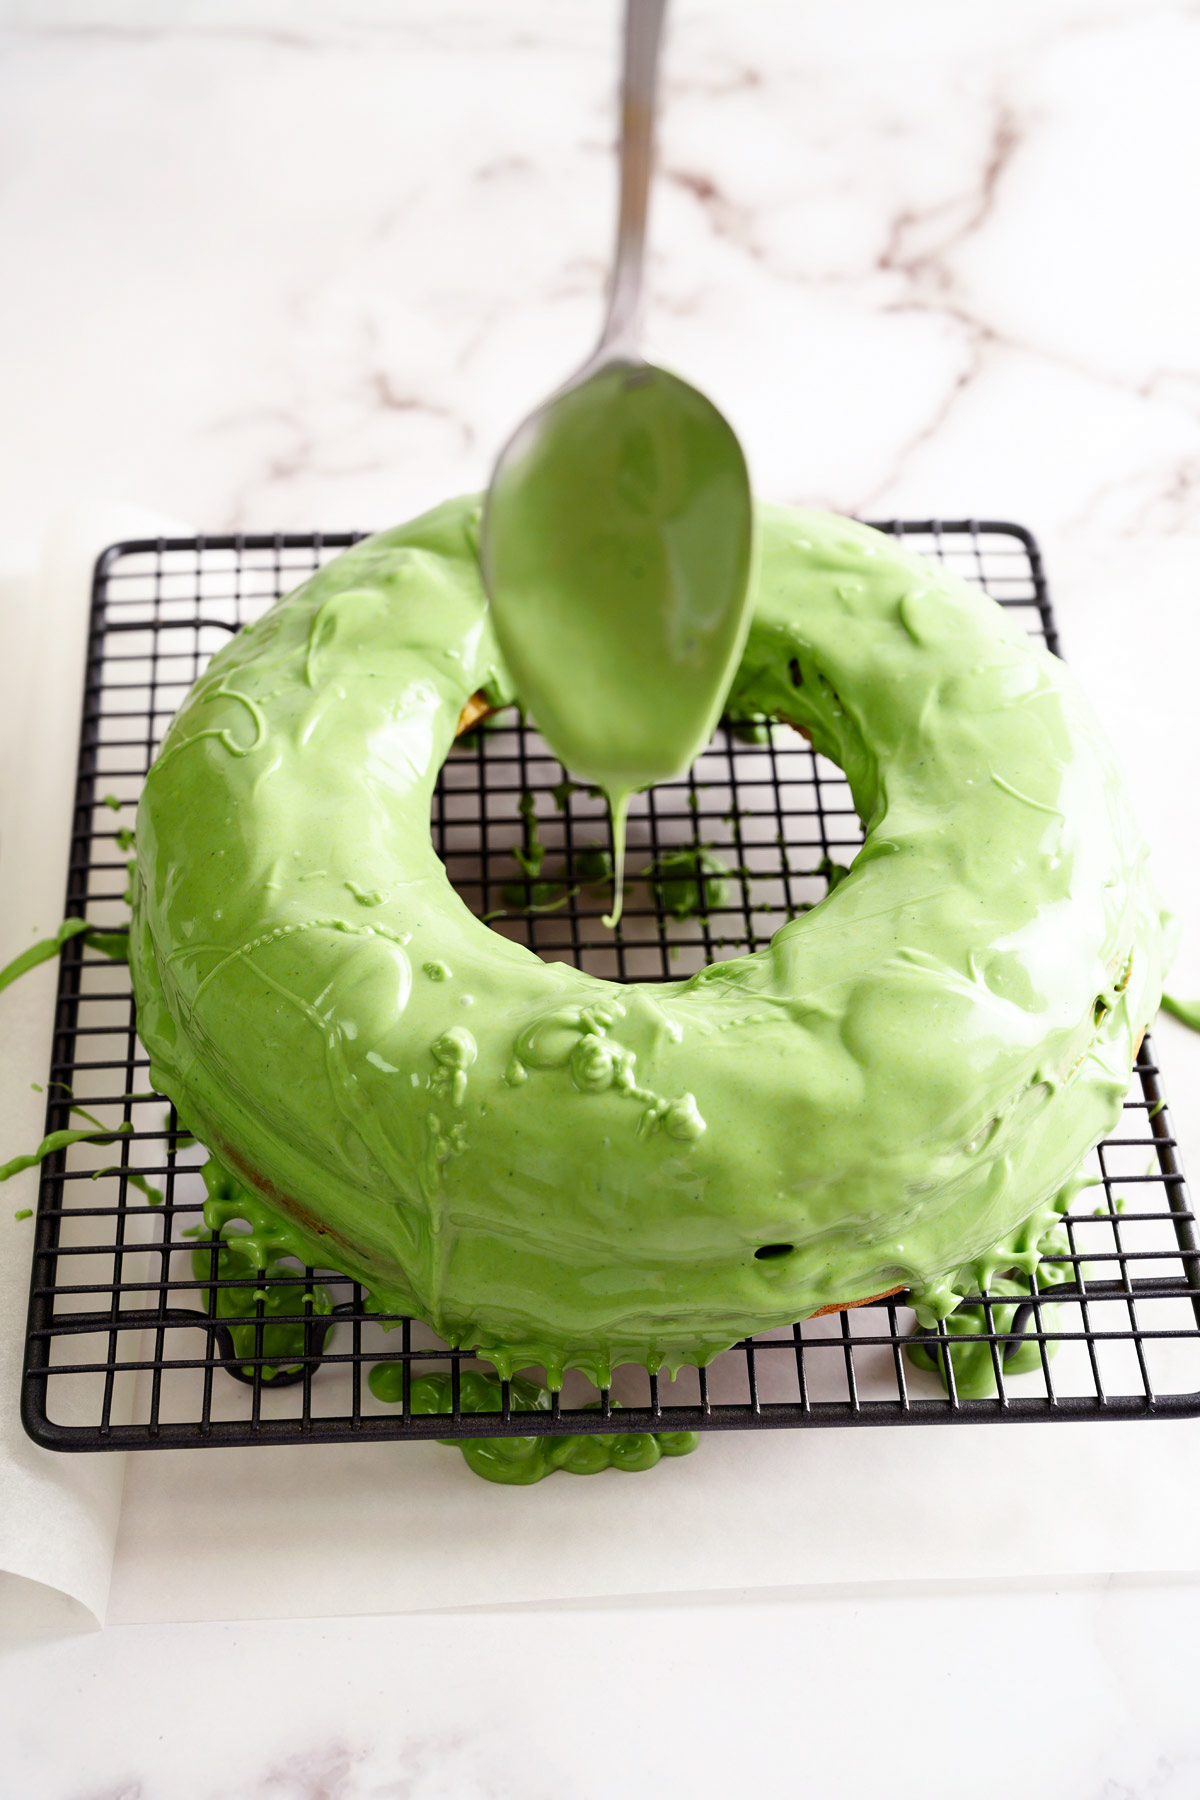 Melted white chocolate tinted green, being poured over a cake on a wire rack.